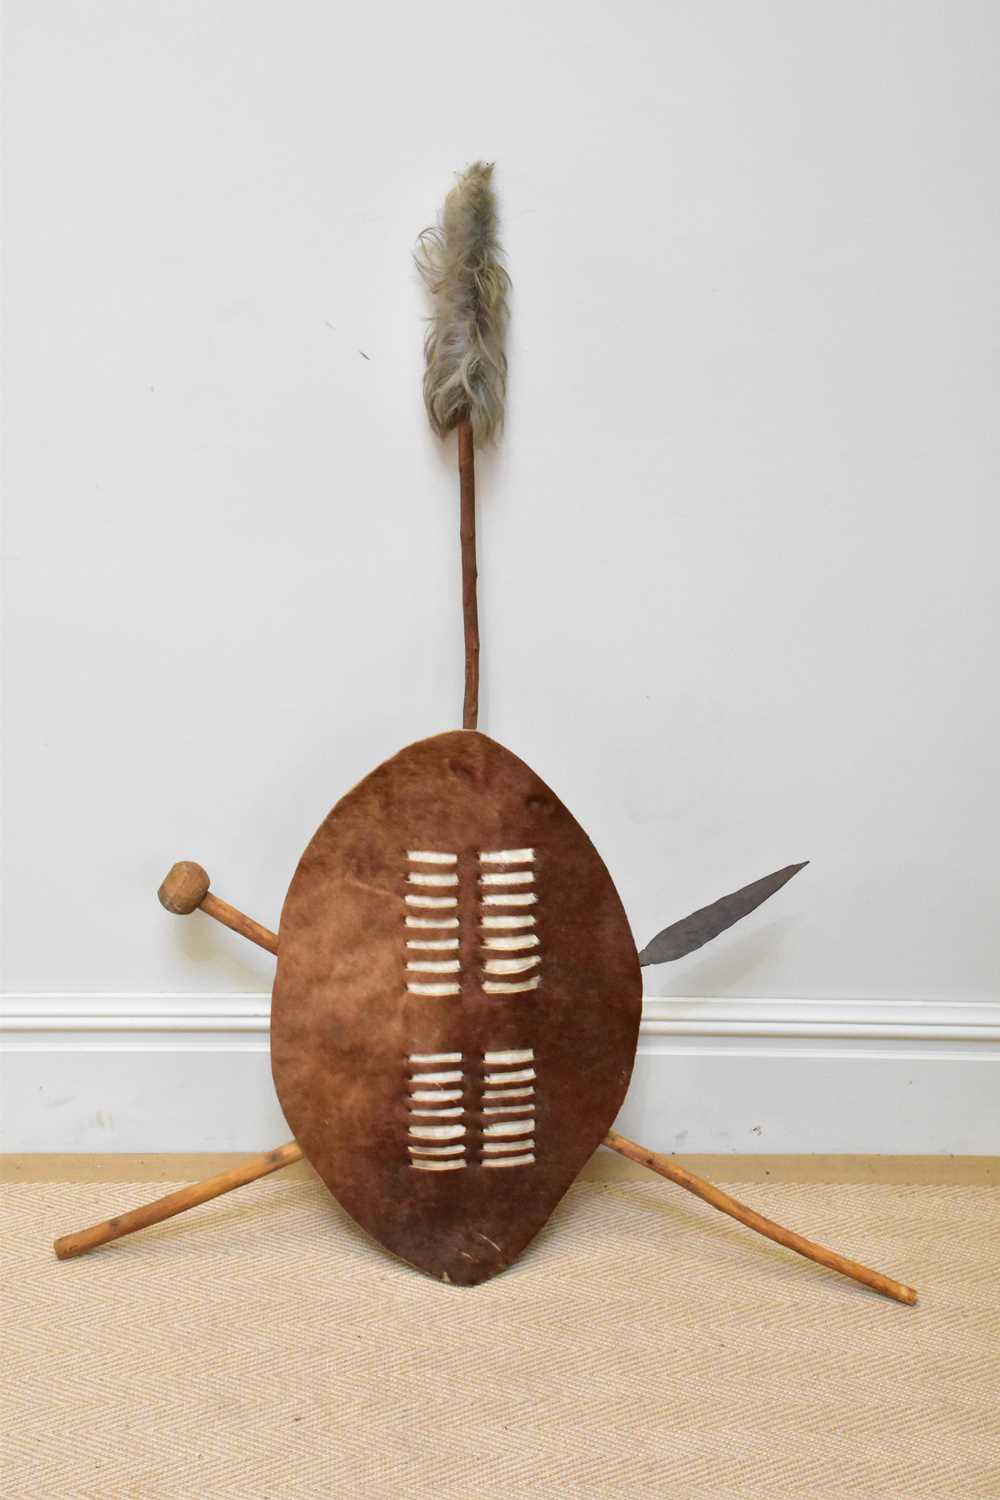 A 20th century Zulu shield, spear and knobkerrie.